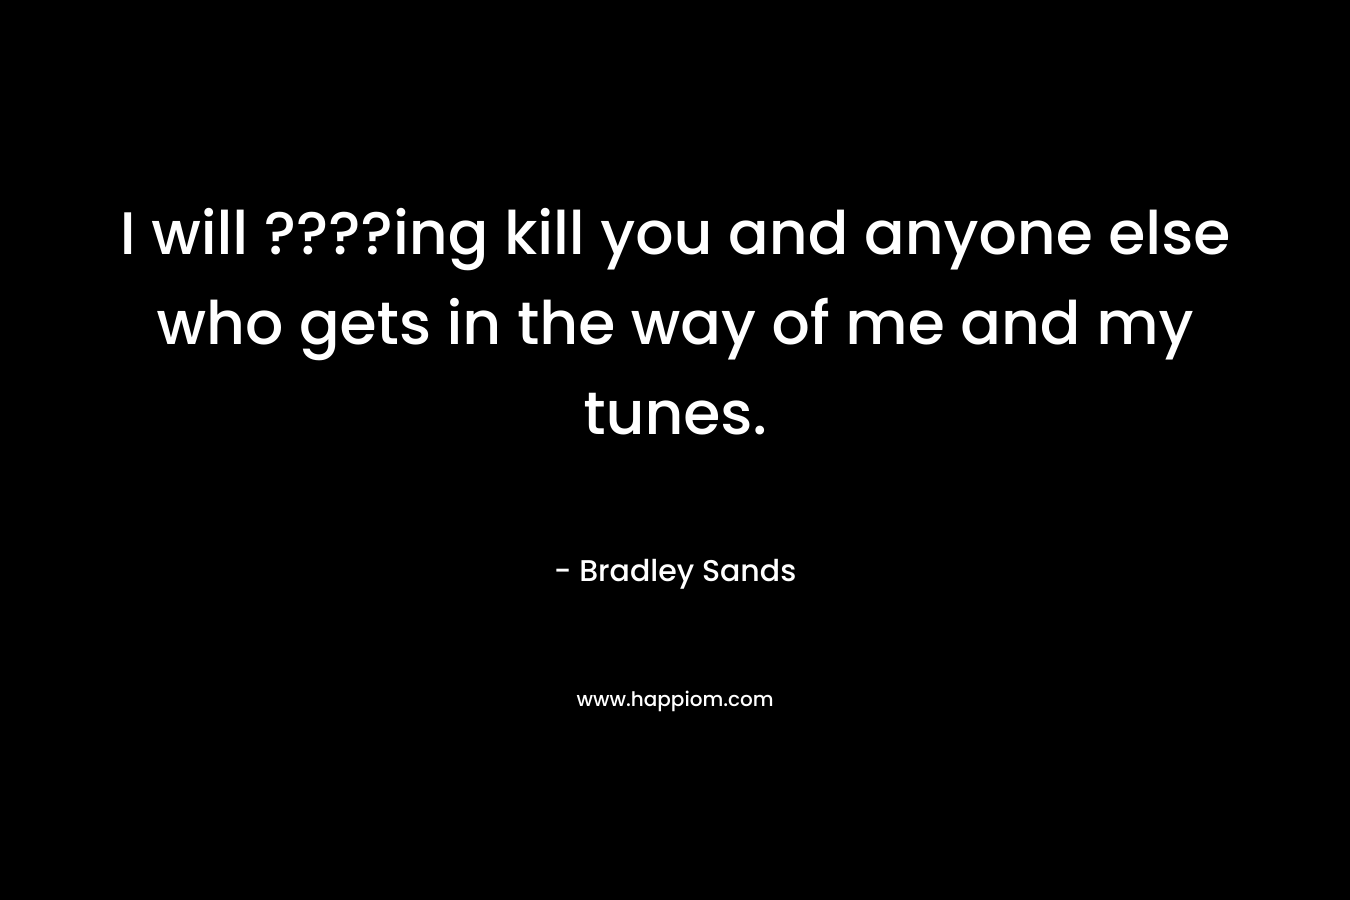 I will ????ing kill you and anyone else who gets in the way of me and my tunes. – Bradley Sands